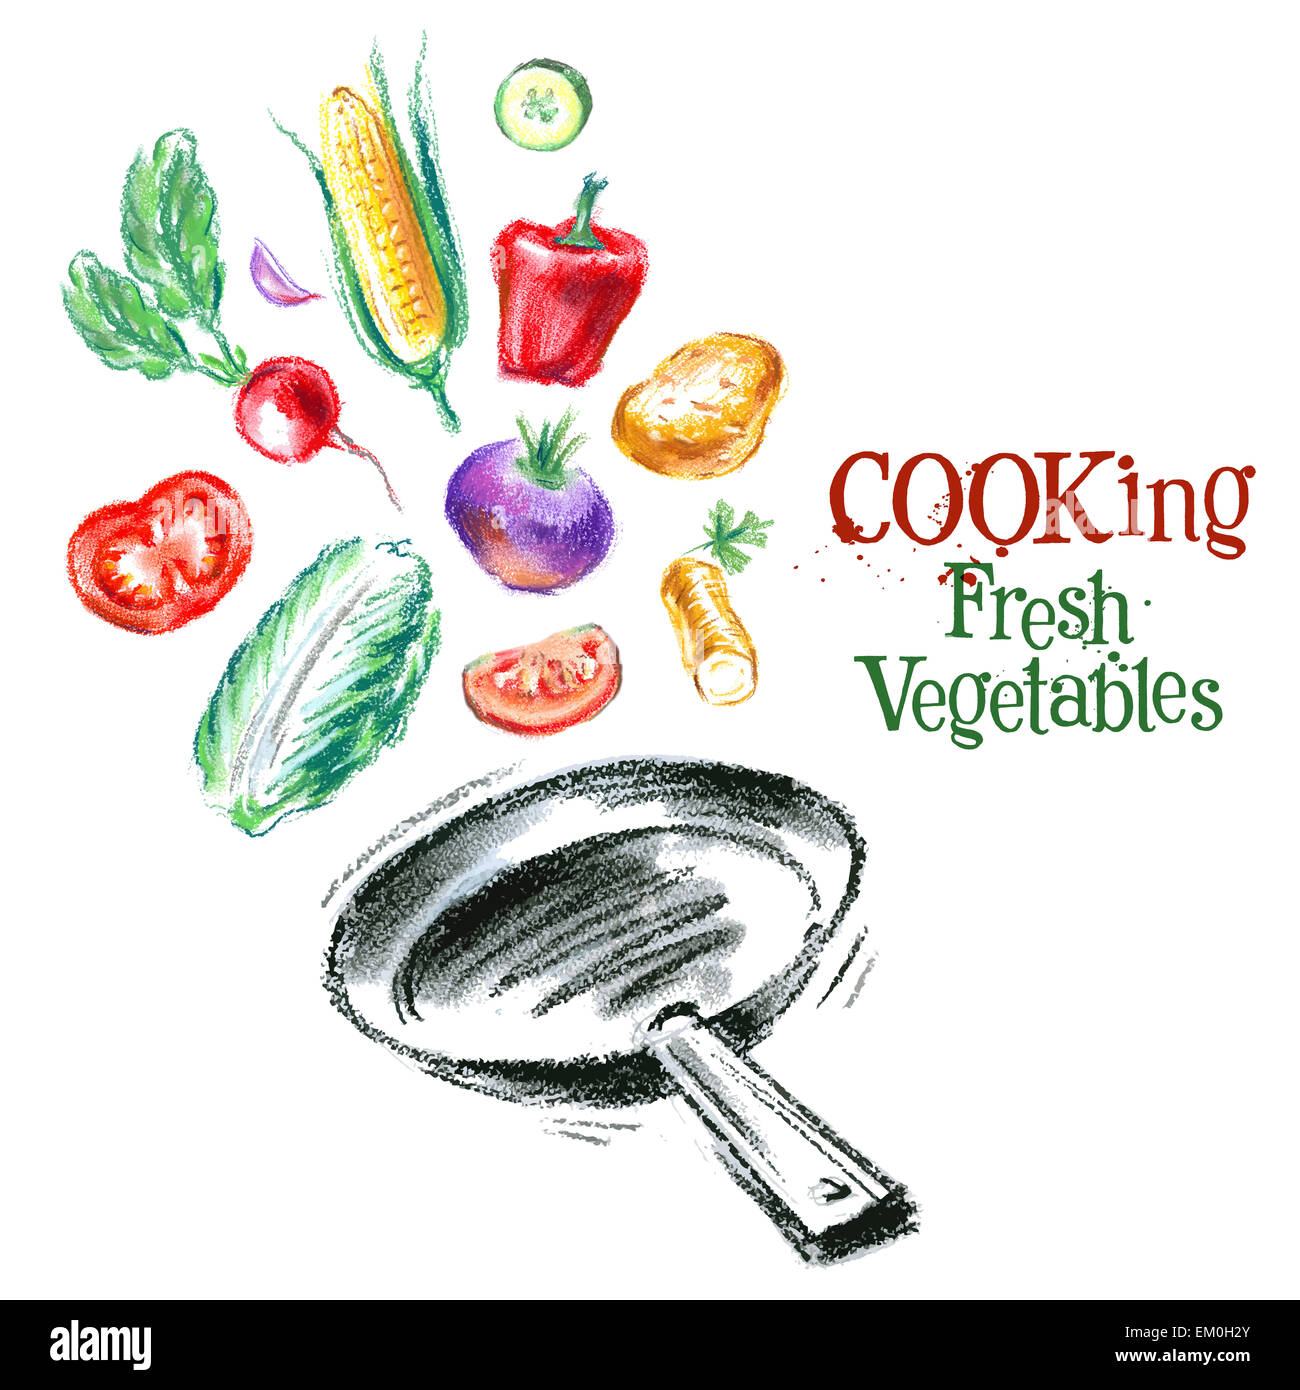 cooking vector logo design template. fresh vegetables, food or diner, eatery icon. Stock Photo